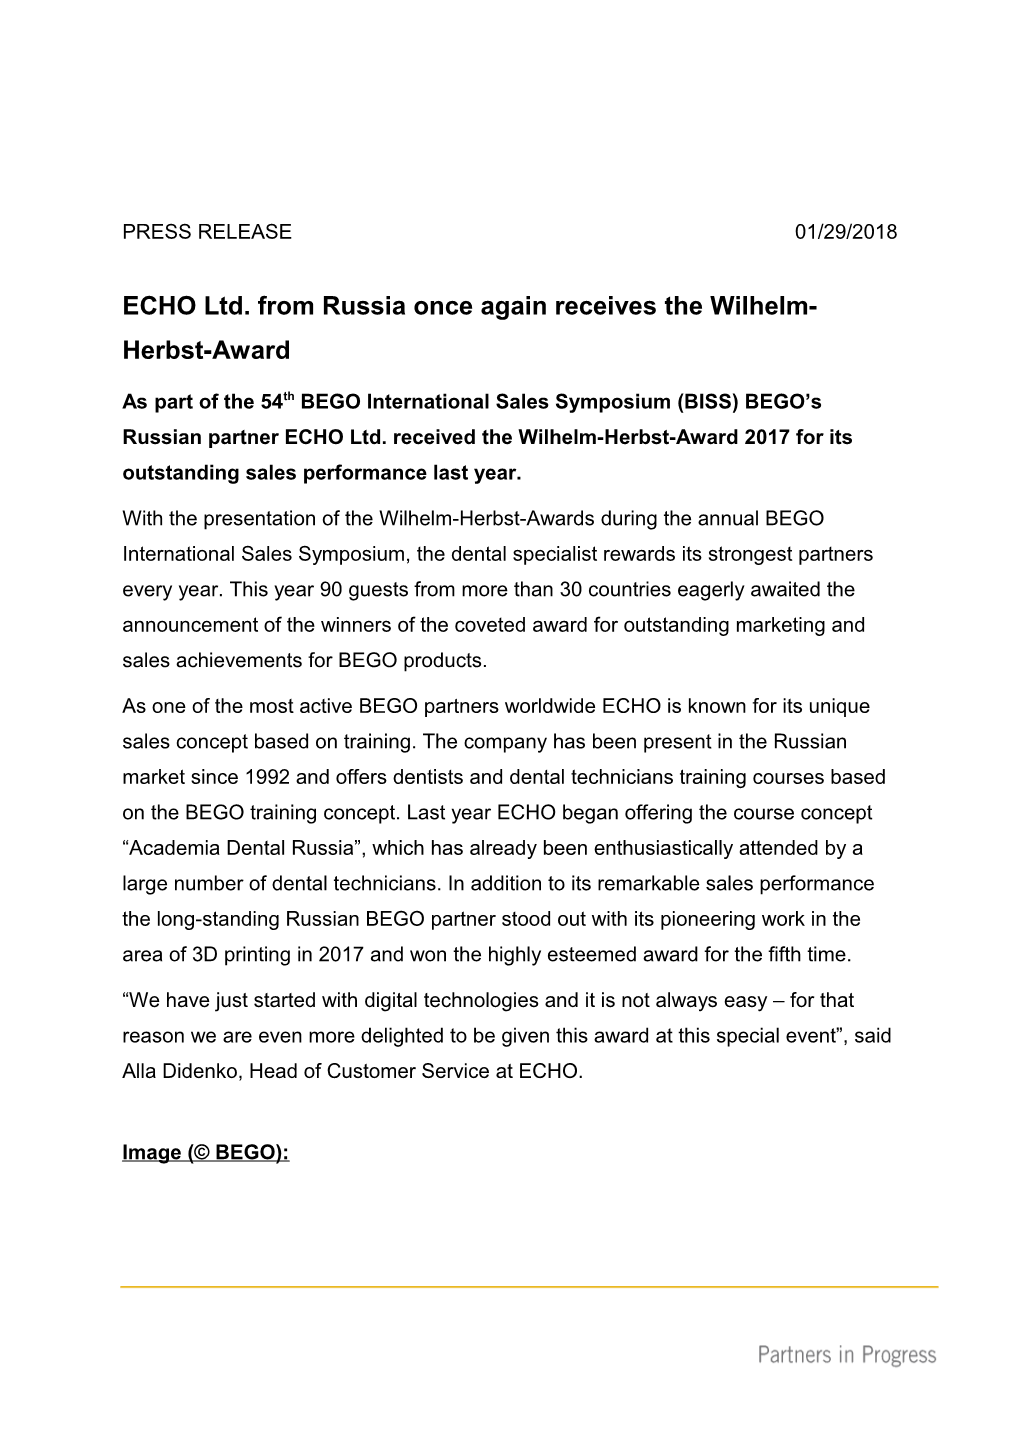 ECHO Ltd. from Russia Once Again Receives the Wilhelm-Herbst-Award